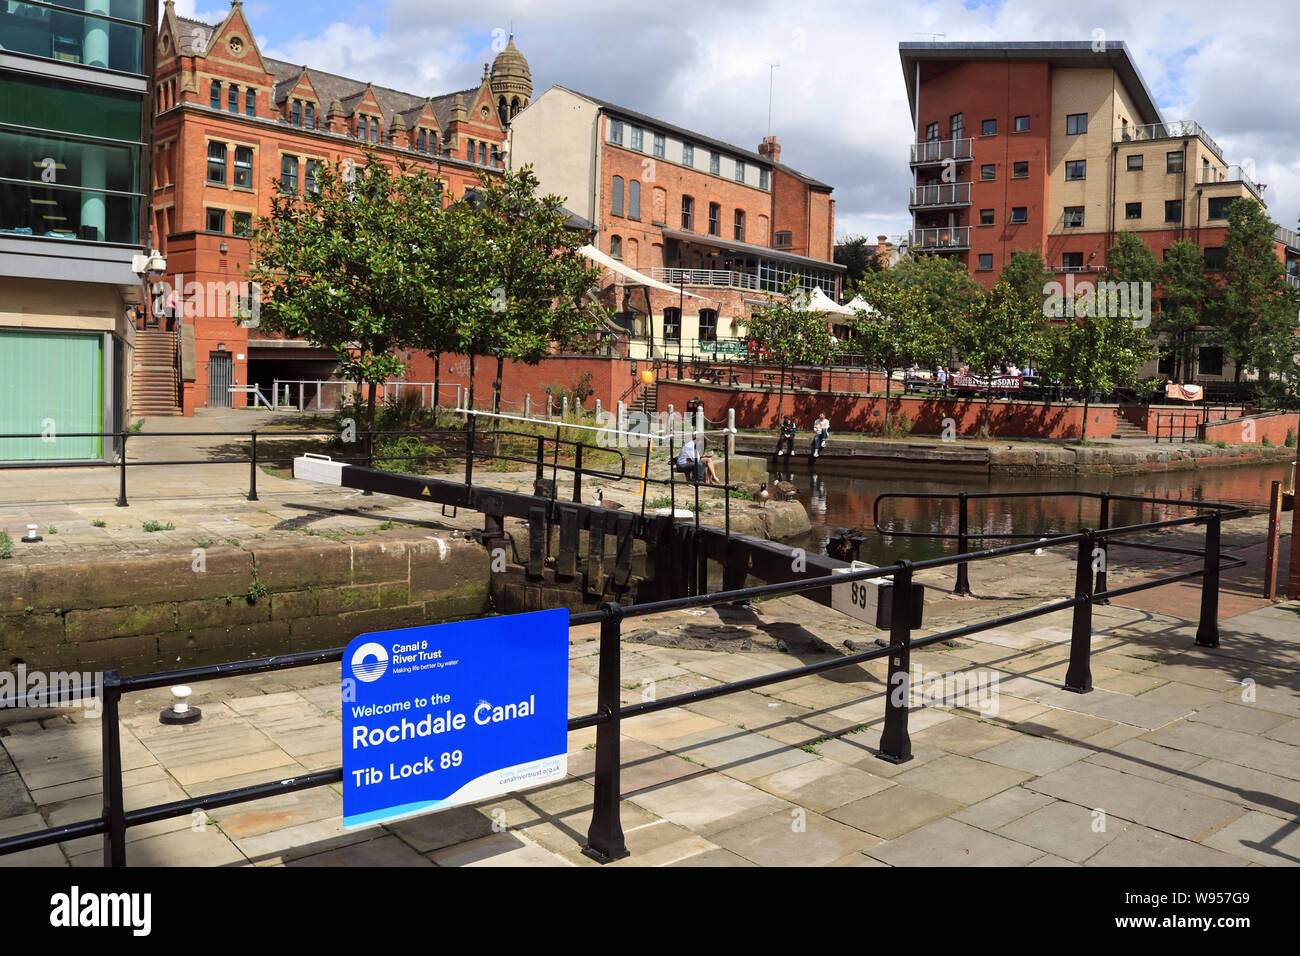 Safety fencing recently installed around Tib Lock on The Rochdale canal in central Manchester. This followed a drowning accident in March 2018 Stock Photo